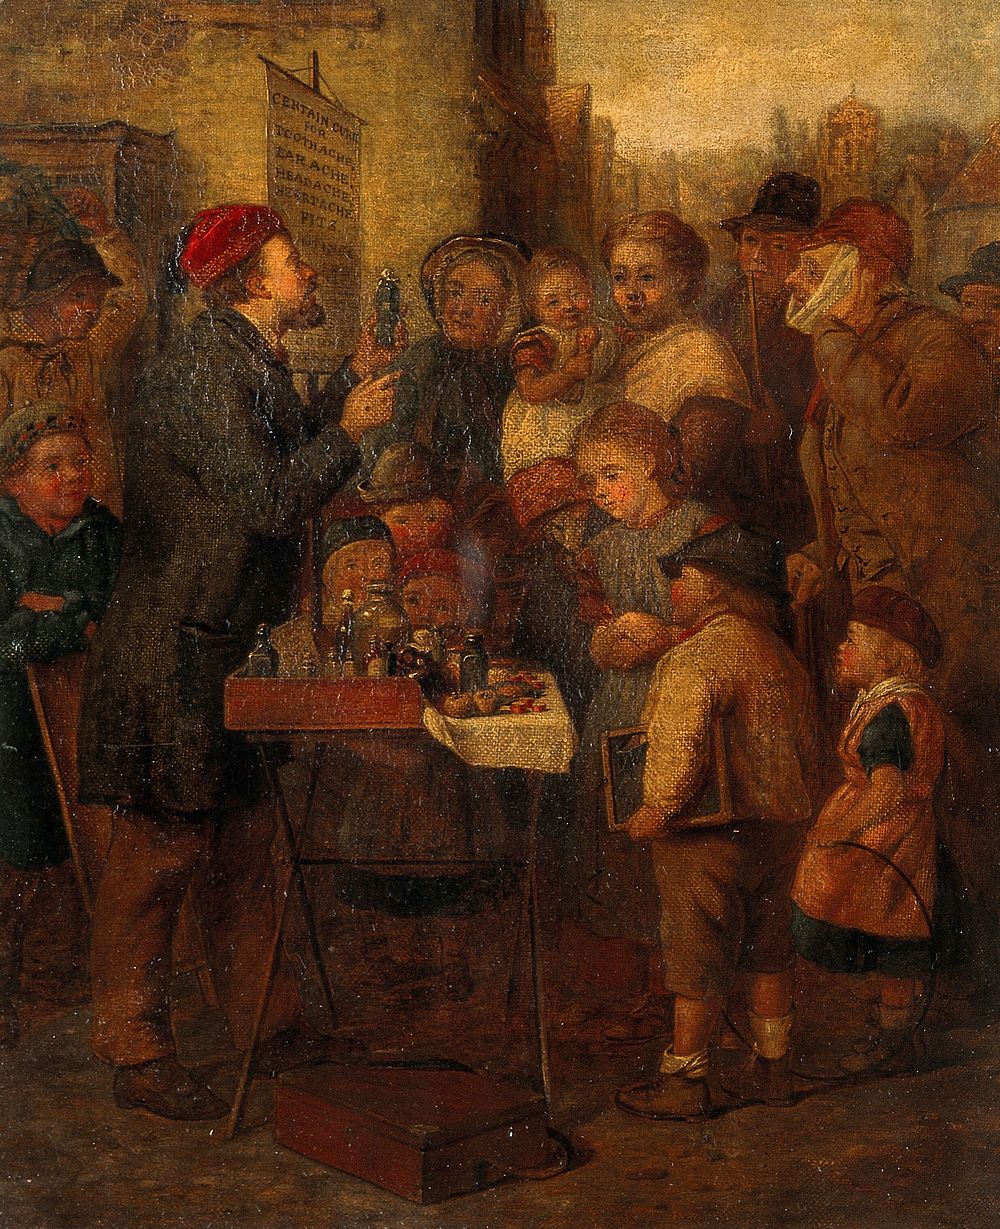 An itinerant quack-doctor. Oil painting by an English painter, mid-19th century.